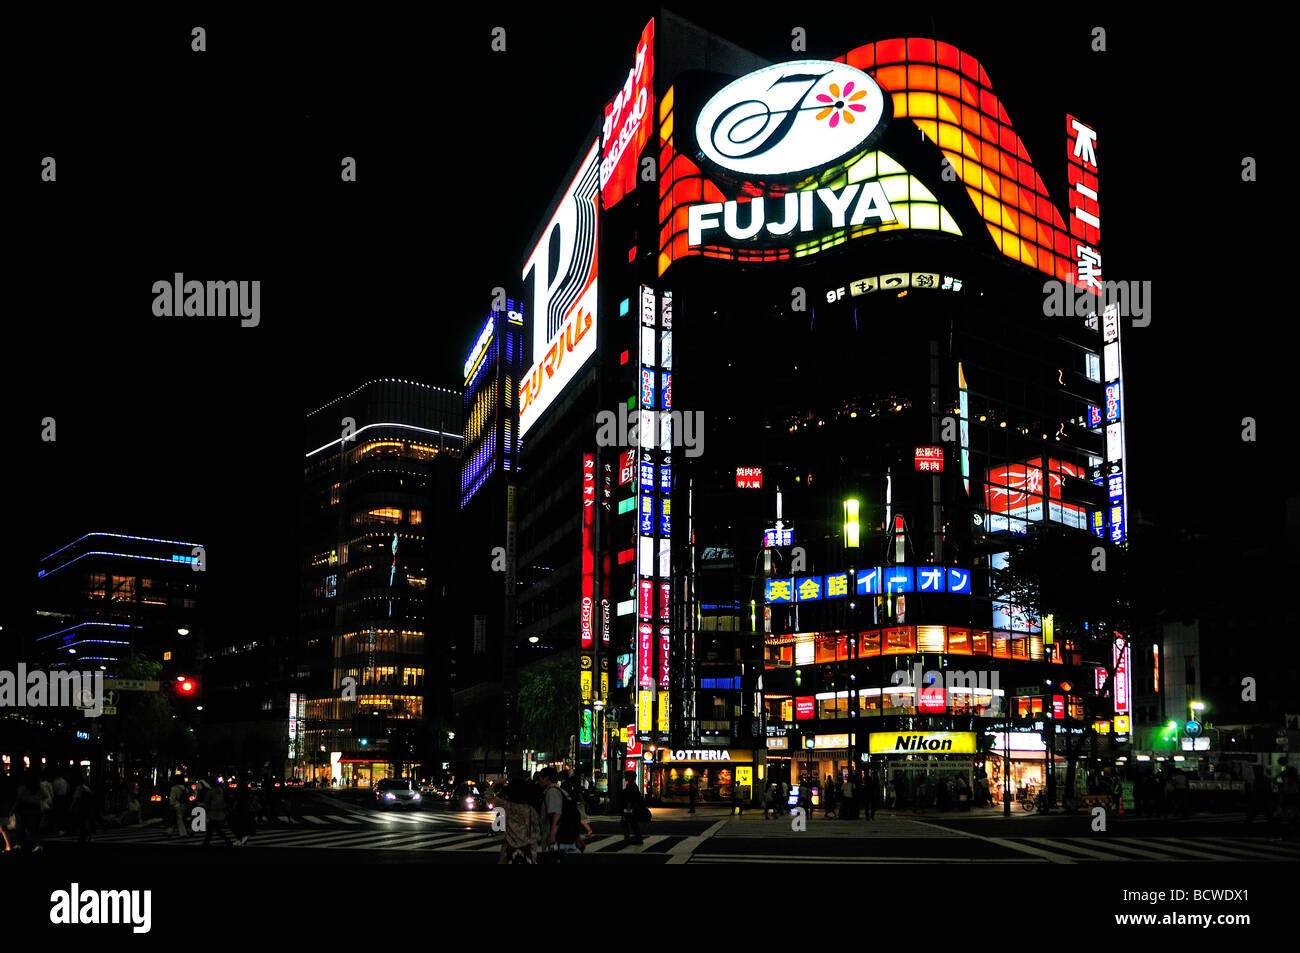 Colourful shop fronts and advertisements screens in Ginza district Tokyo Japan Stock Photo